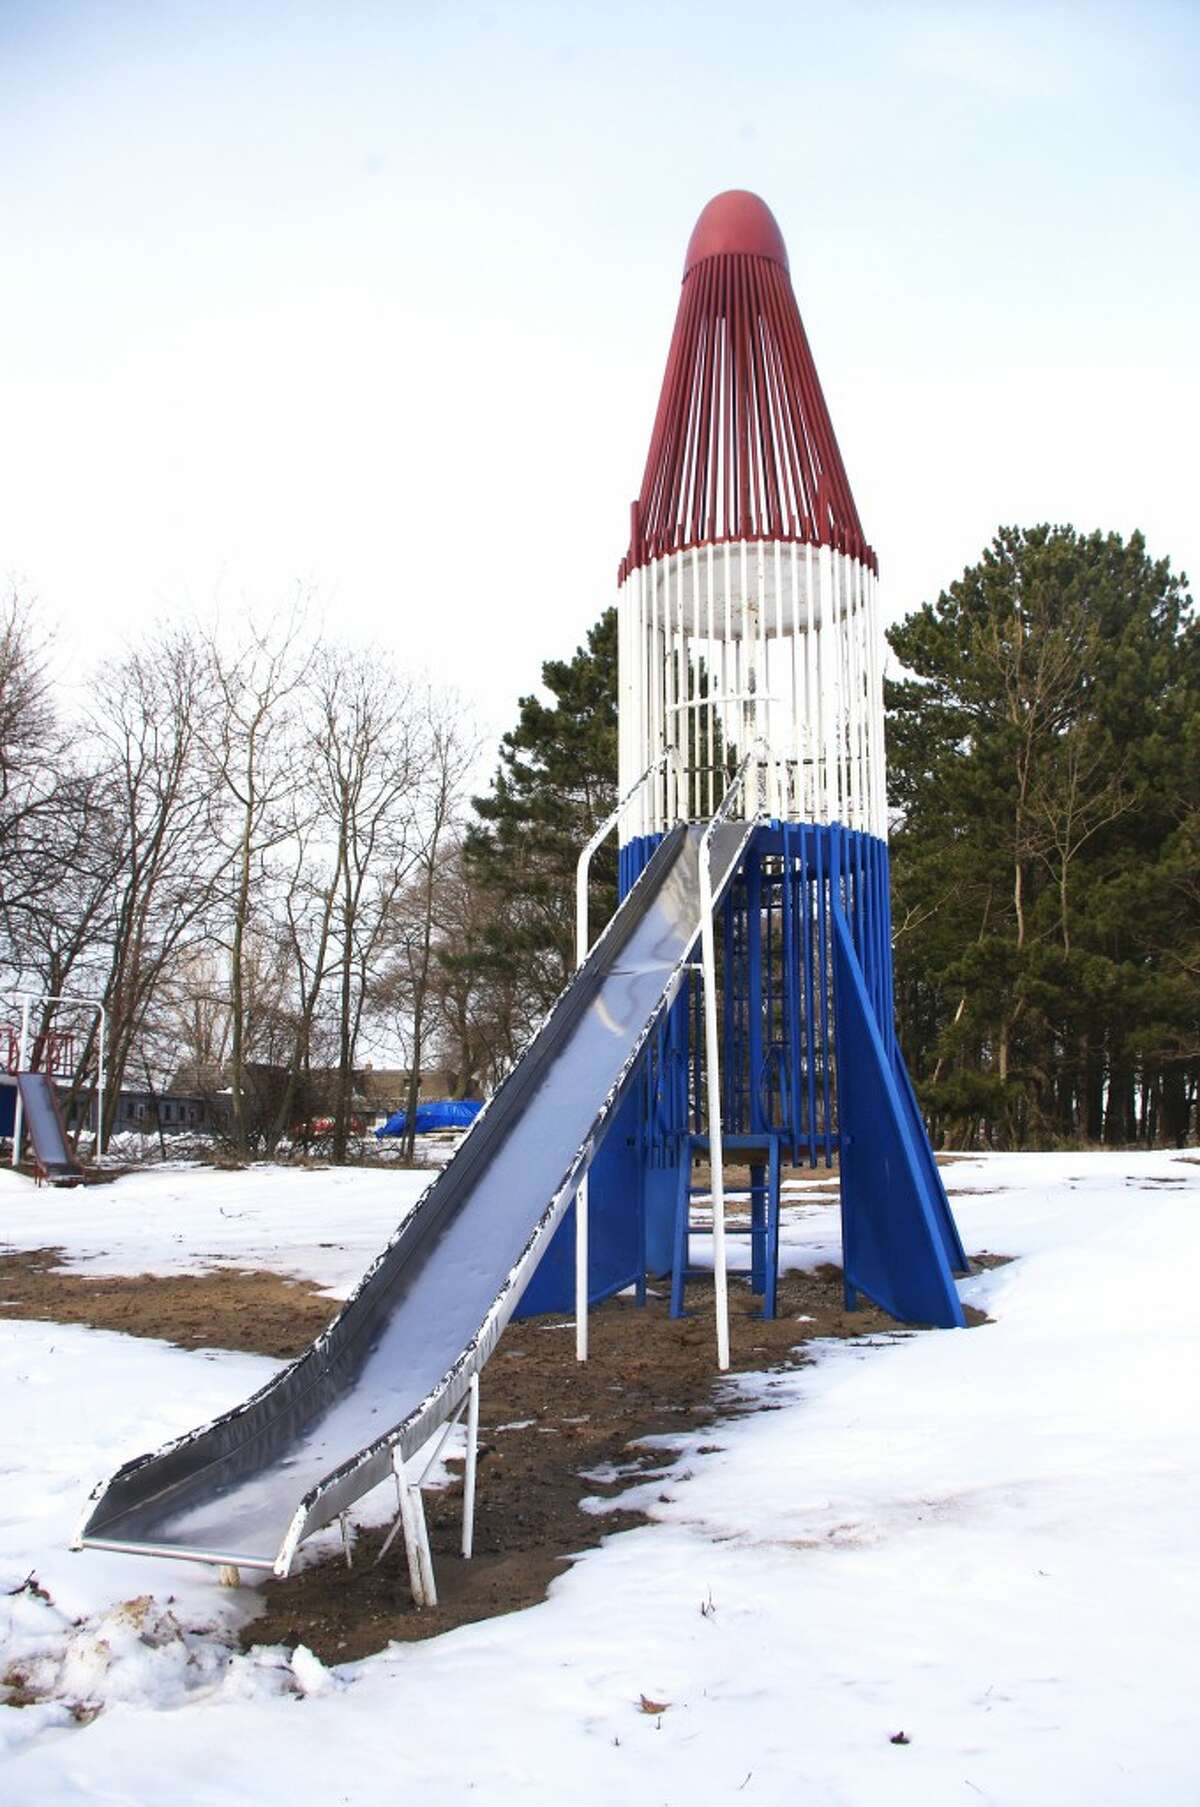 Generations of kids know the rocket slide at “Rocket Park,” but the structure is outdated. Plans are moving ahead for a new park, with a work group meeting to choose a design structure. (Dave Yarnell/News Advocate)